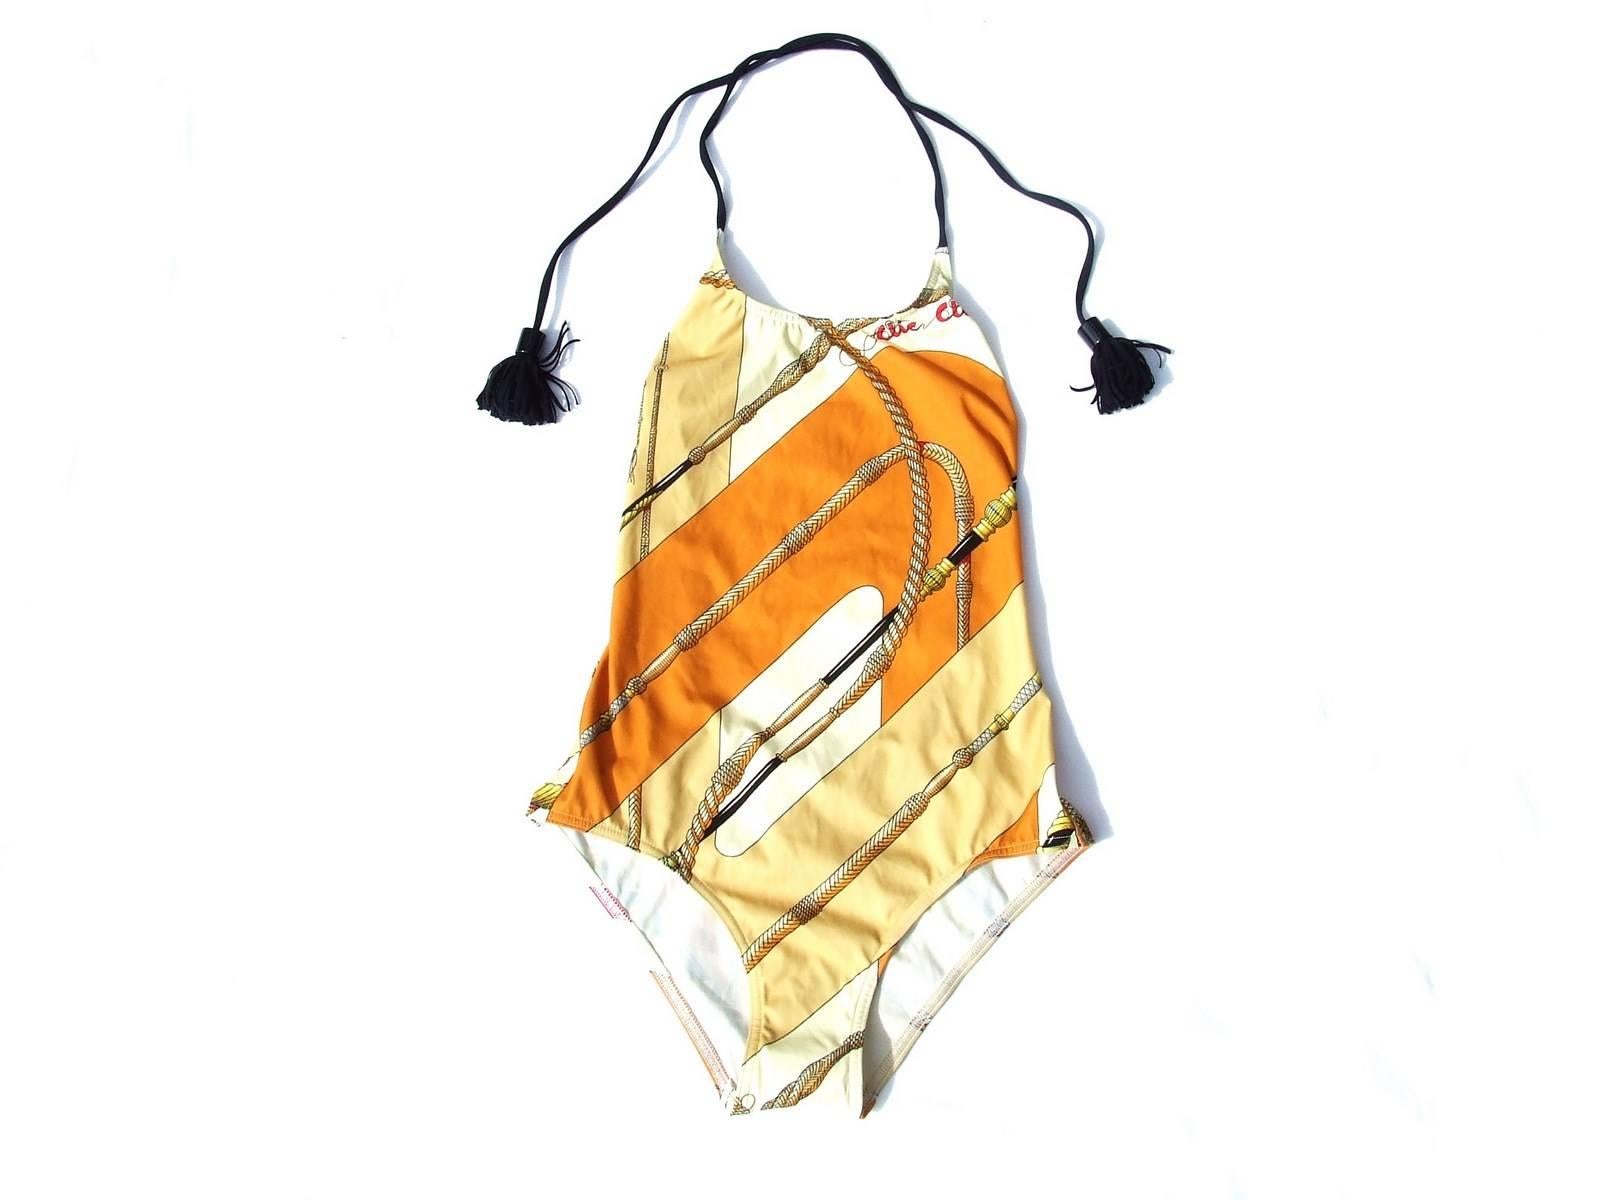 Beautiful Authentic Hermes Swimsuit

Pattern: Clic Clac

Made in France

Halterneck Swimsuit, 1 piece

Made of 62% polyamide and 38% elastane

Colorways: Orange, Beige, Black

closes by 2 links to tie around the neck

Size: